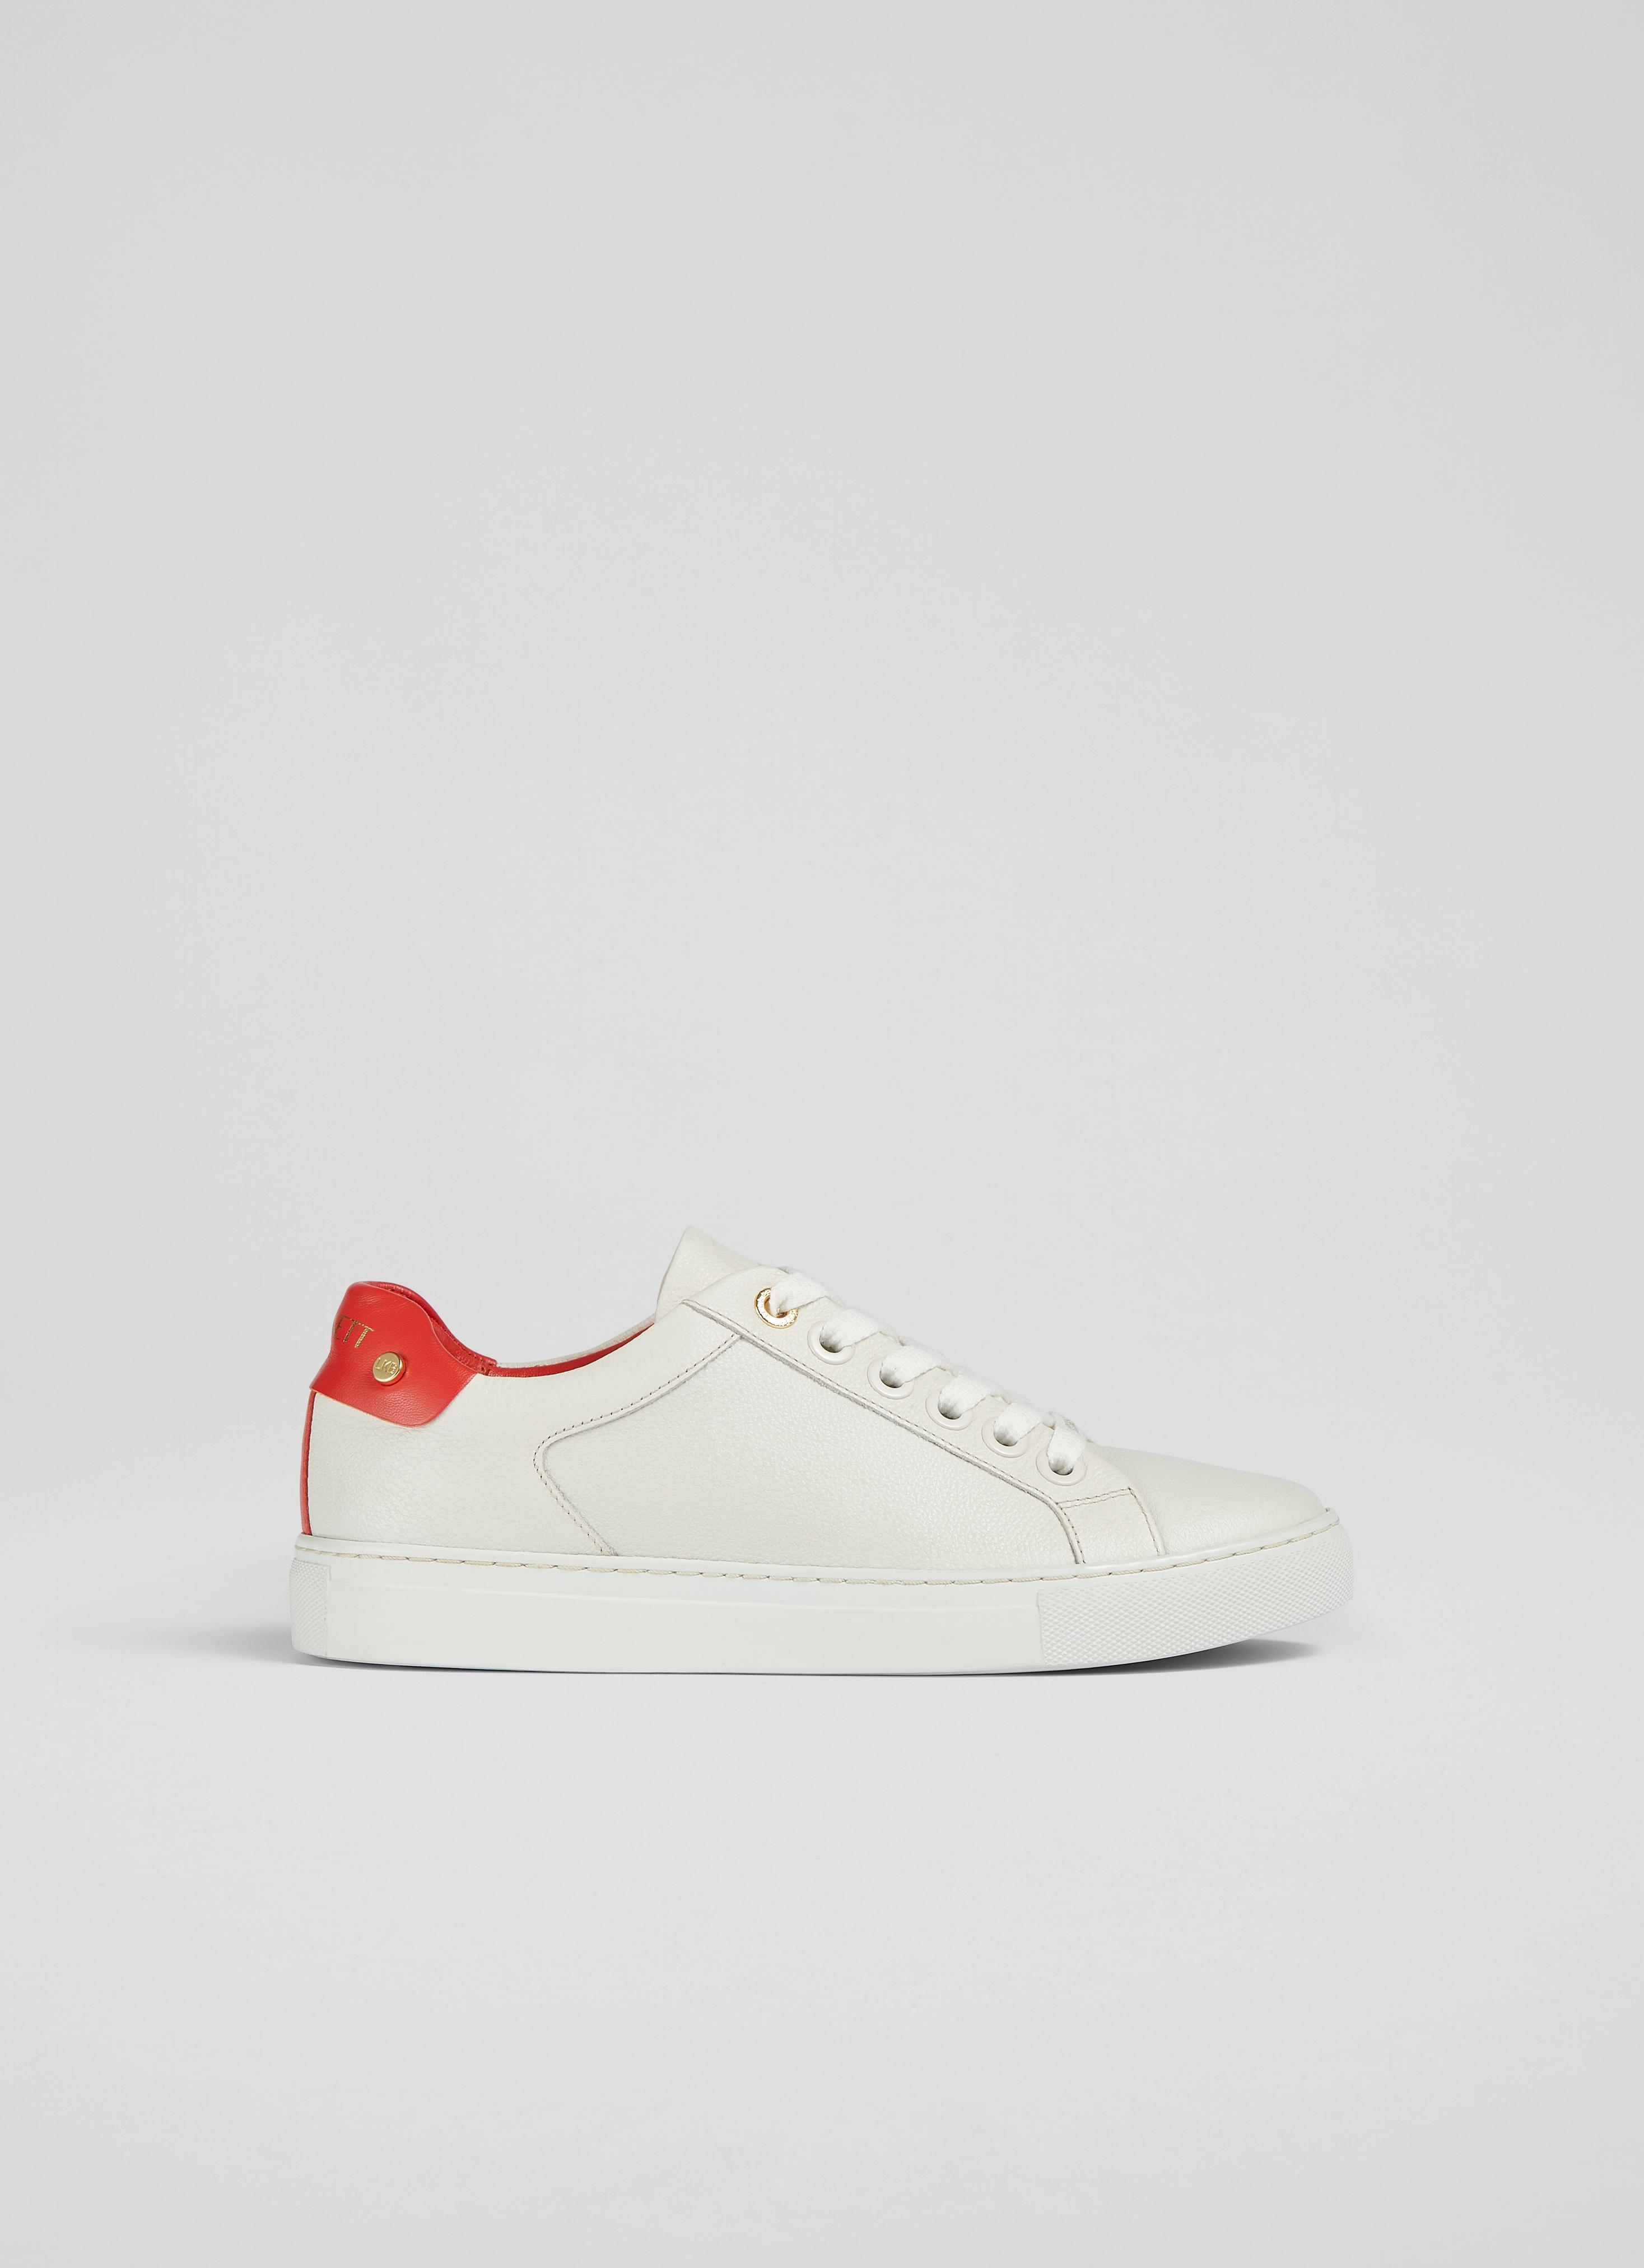 L.K.Bennett Signature White and Red Classic Stud Trainer, Red White